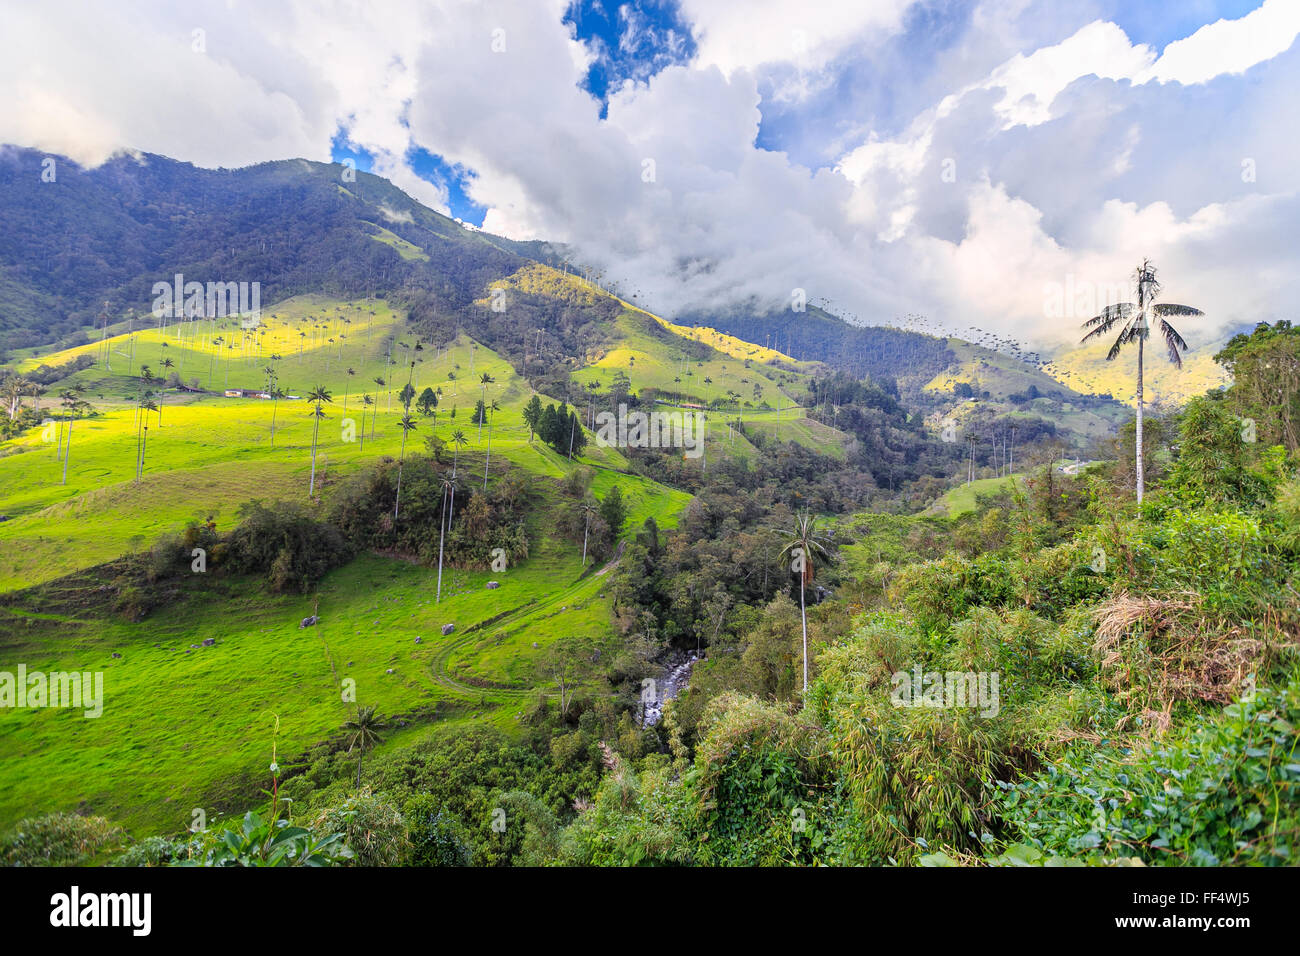 green jungle in mountains, palm trees in cocora valley, colombia, latin america Stock Photo